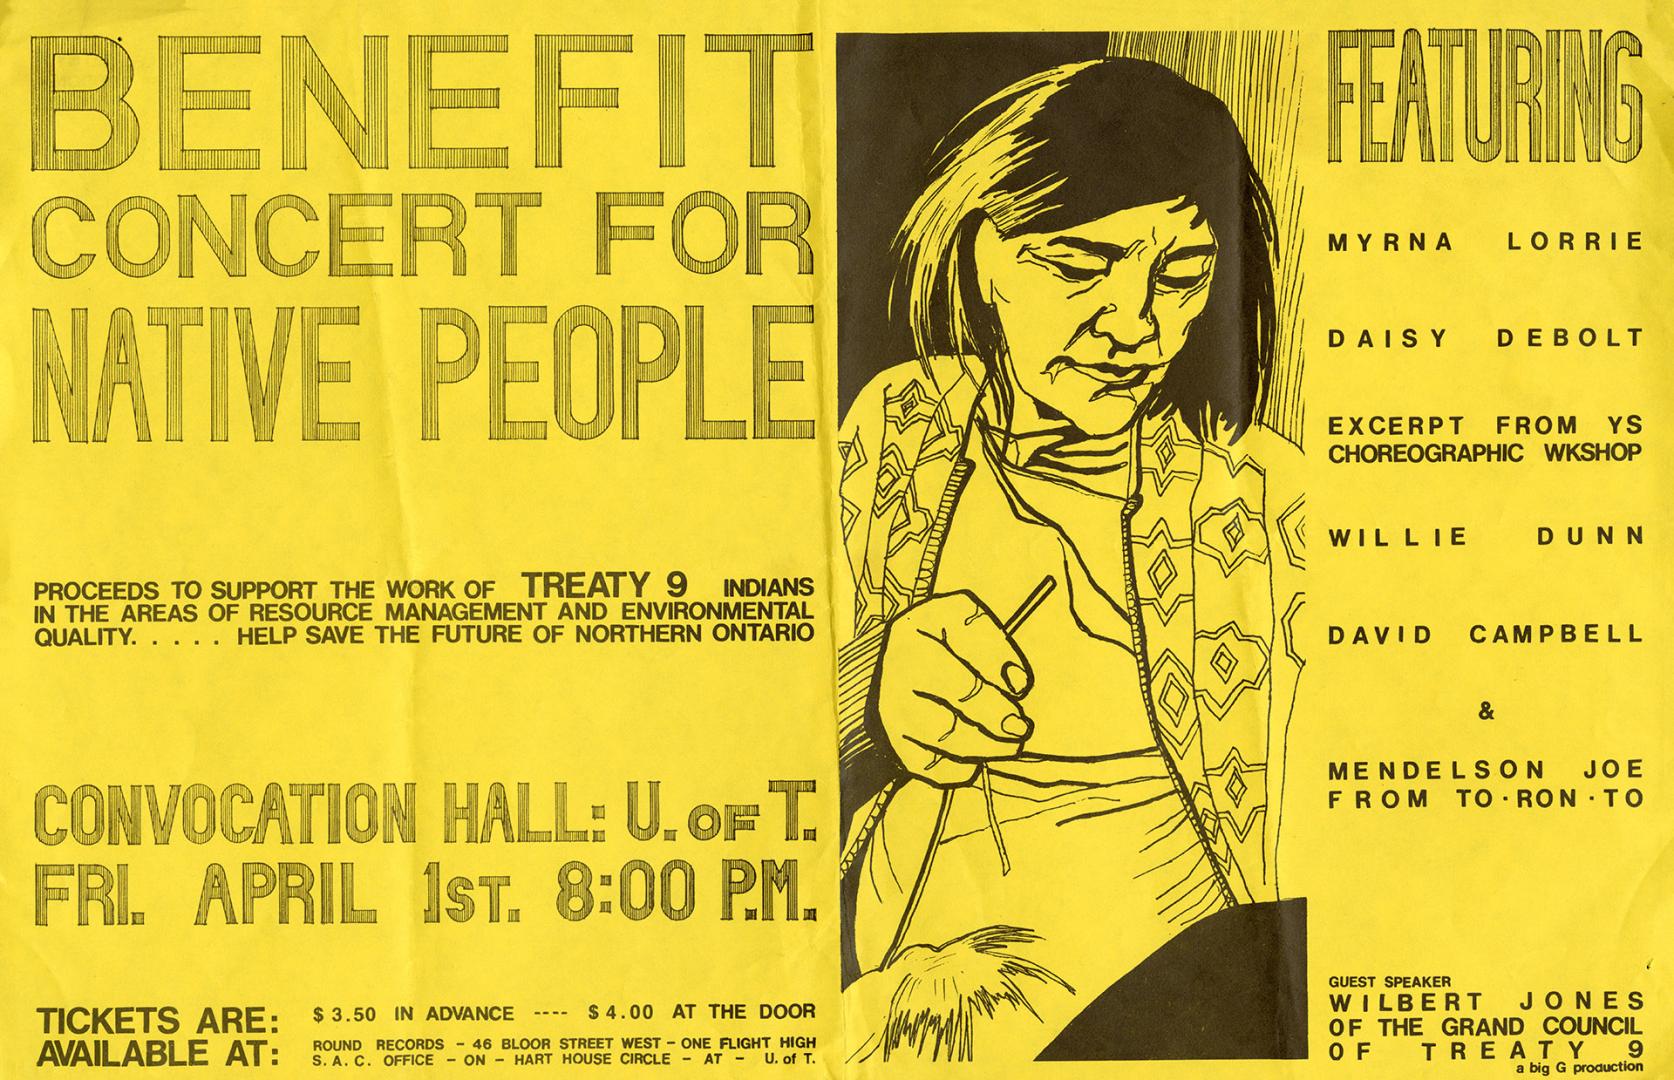 A poster featuring an illustration of a woman with thread.